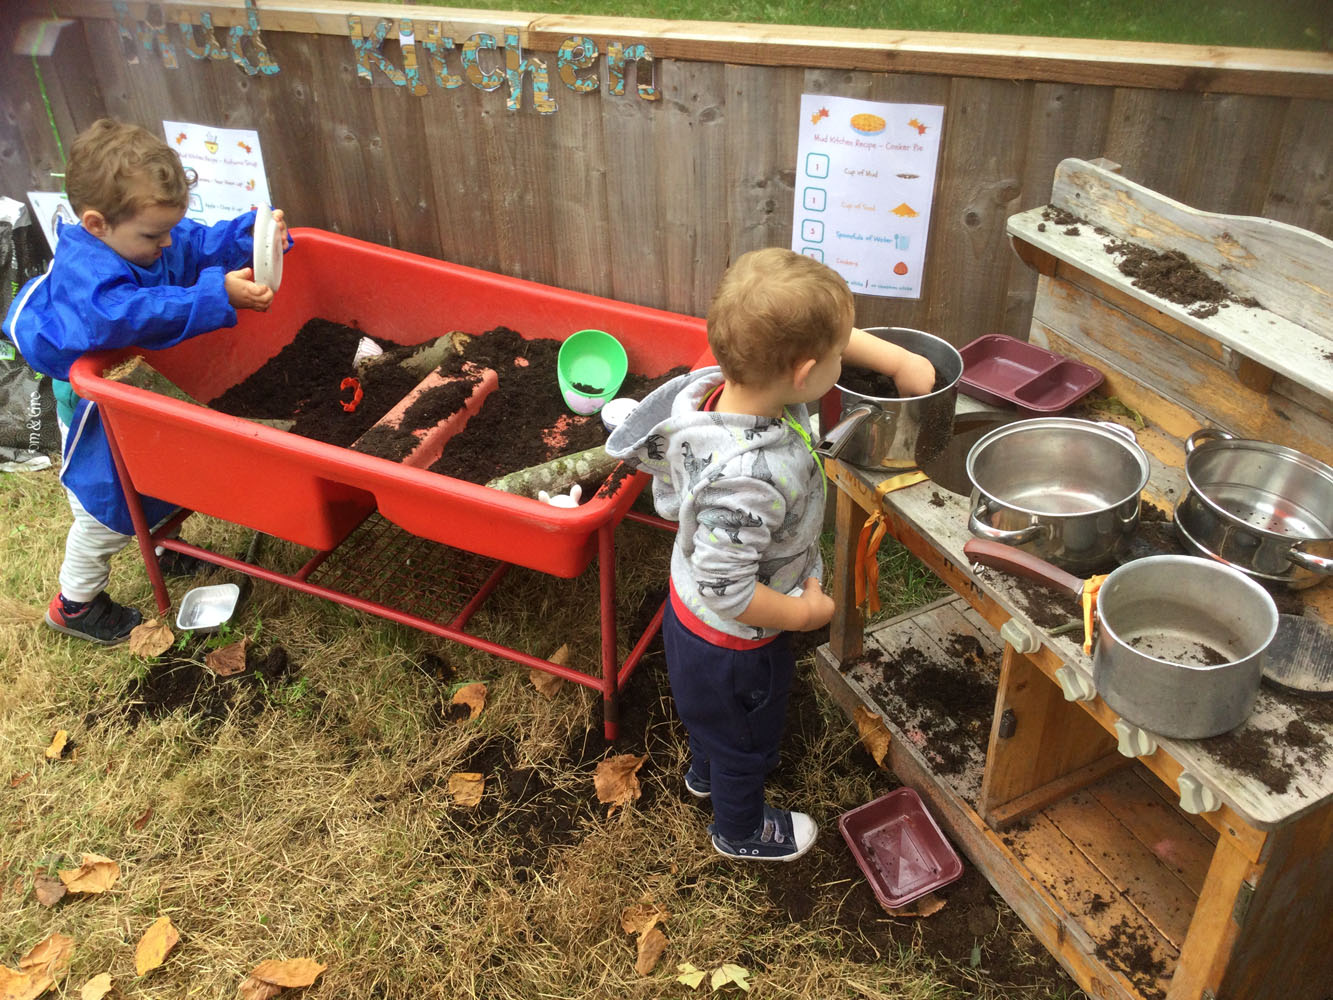 Child playing with saucepans and mud